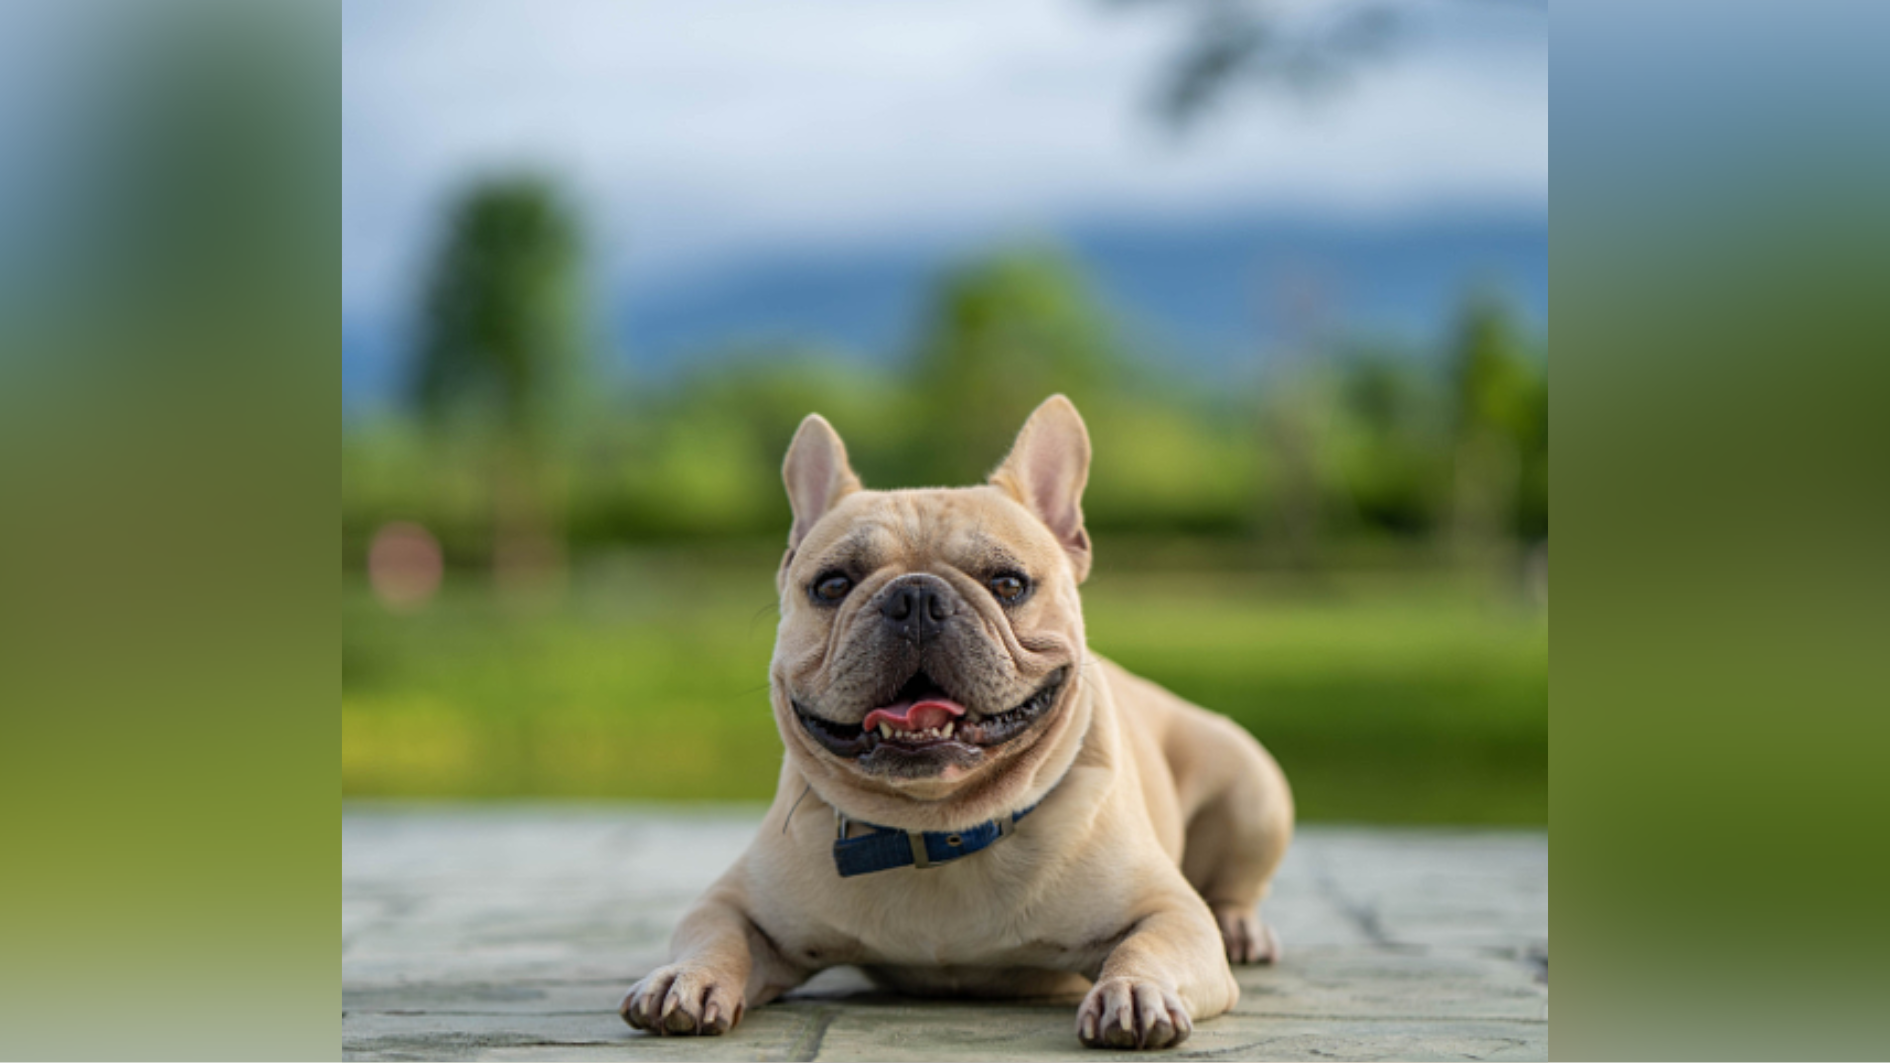 First time in 30-plus years, French bulldog becomes top US dog breed